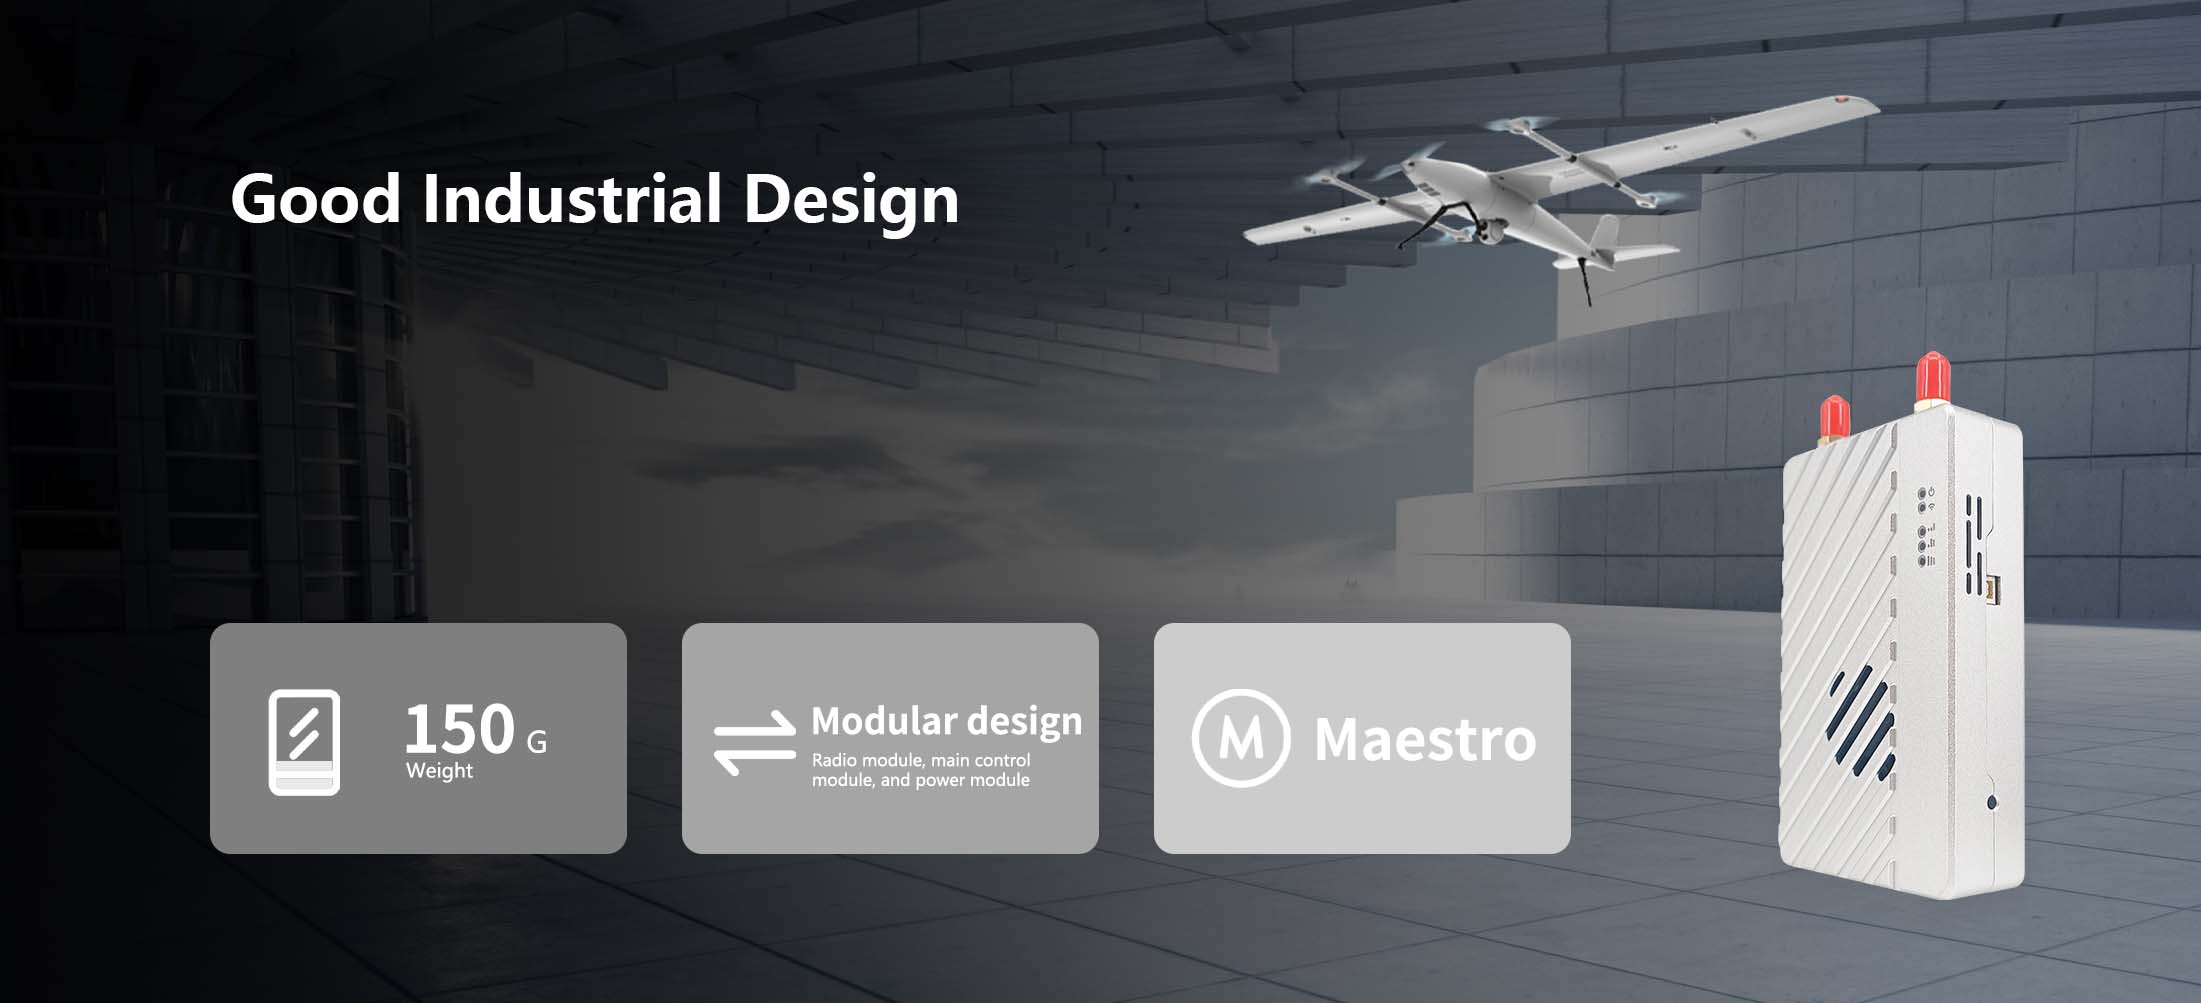 Maestro MK22/MK55, Industrial design with modular components: radio, control, and power modules.